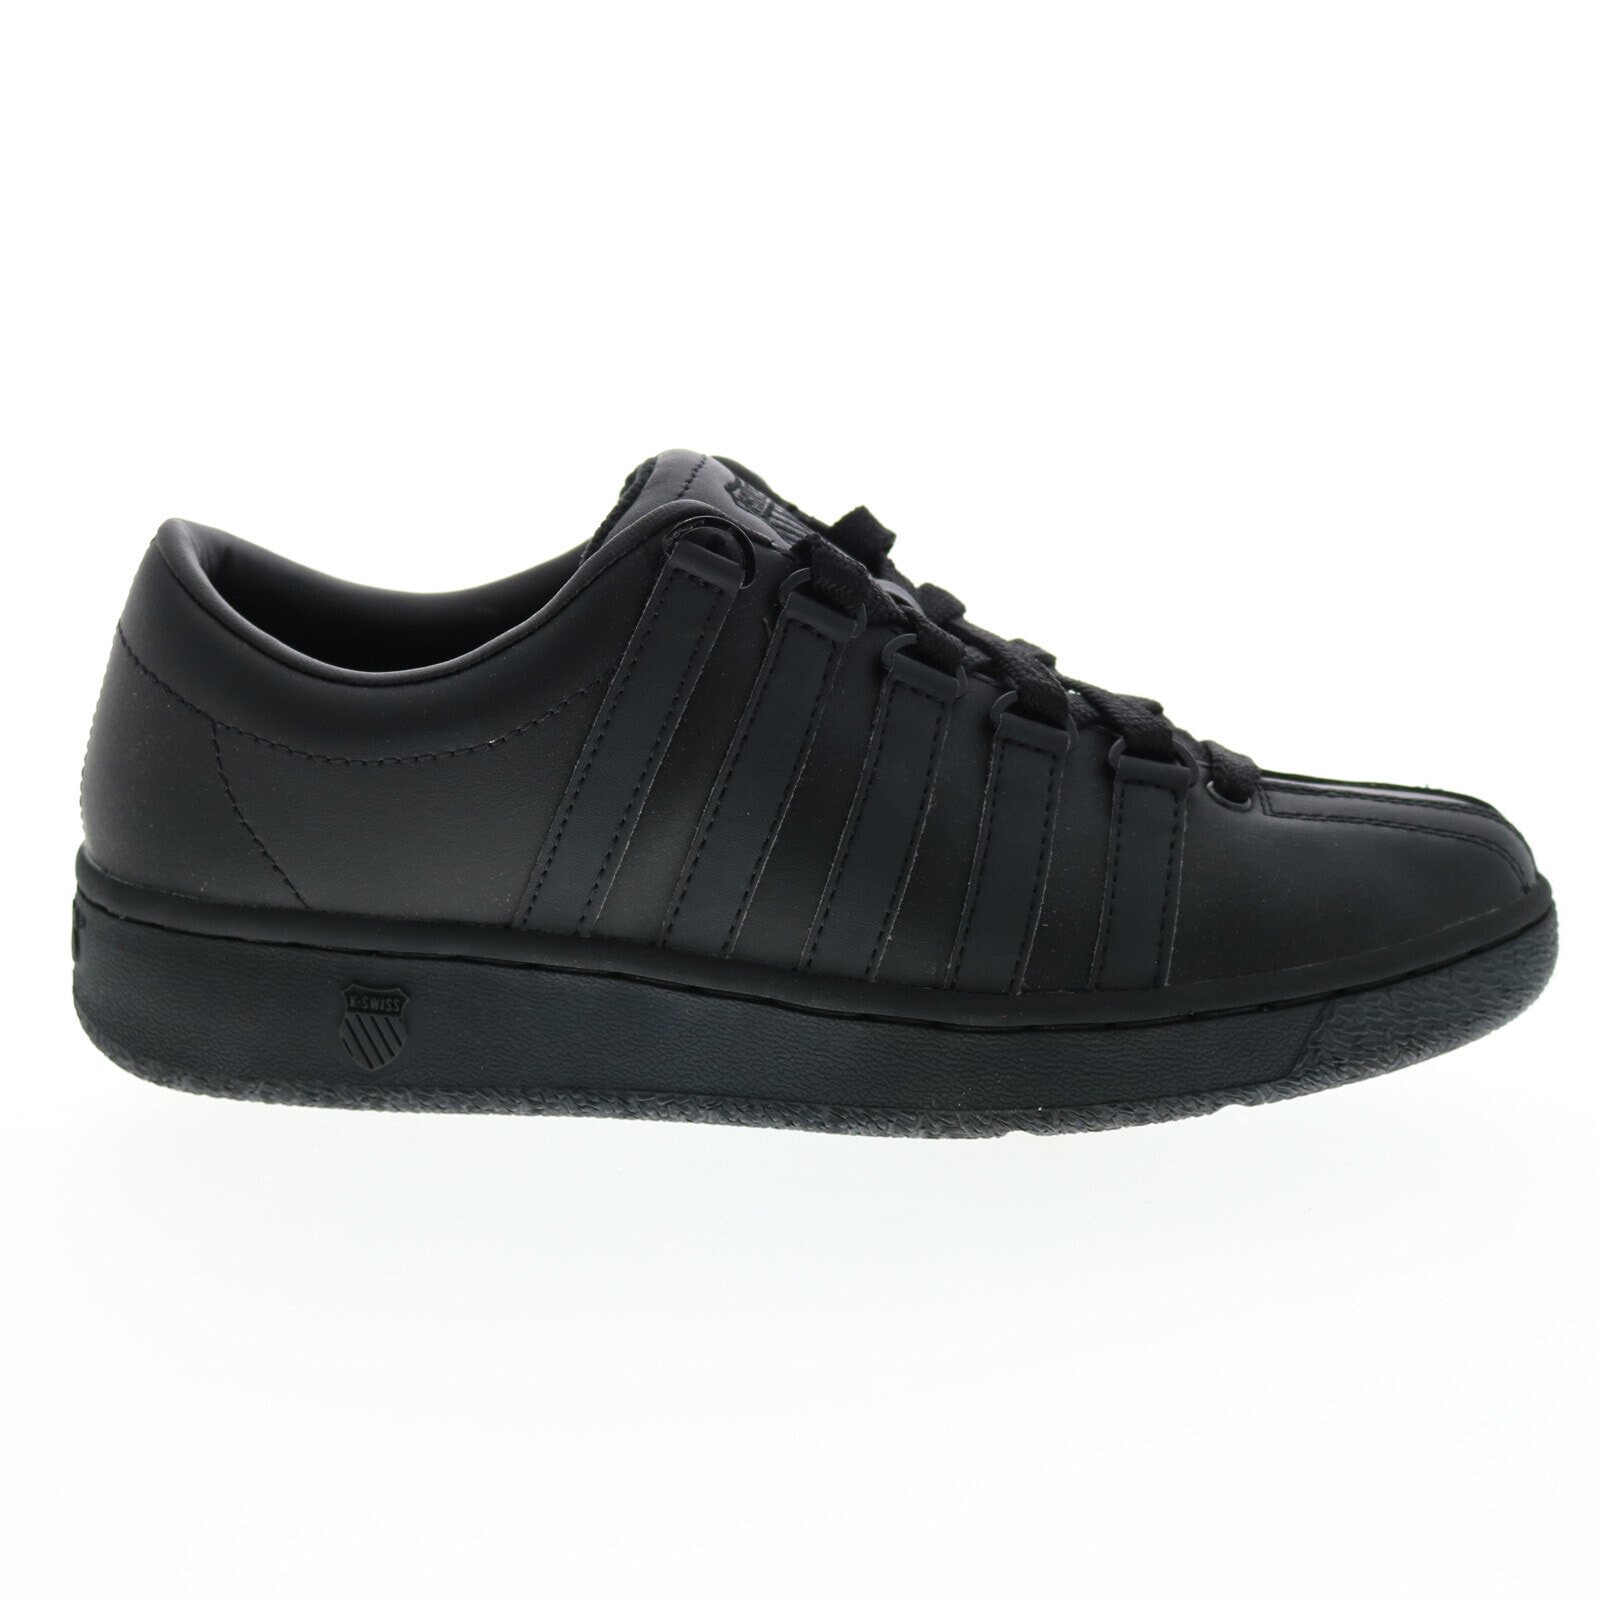 K-Swiss Classic 2000 06506-001-M Mens Black Lifestyle Sneakers Shoes